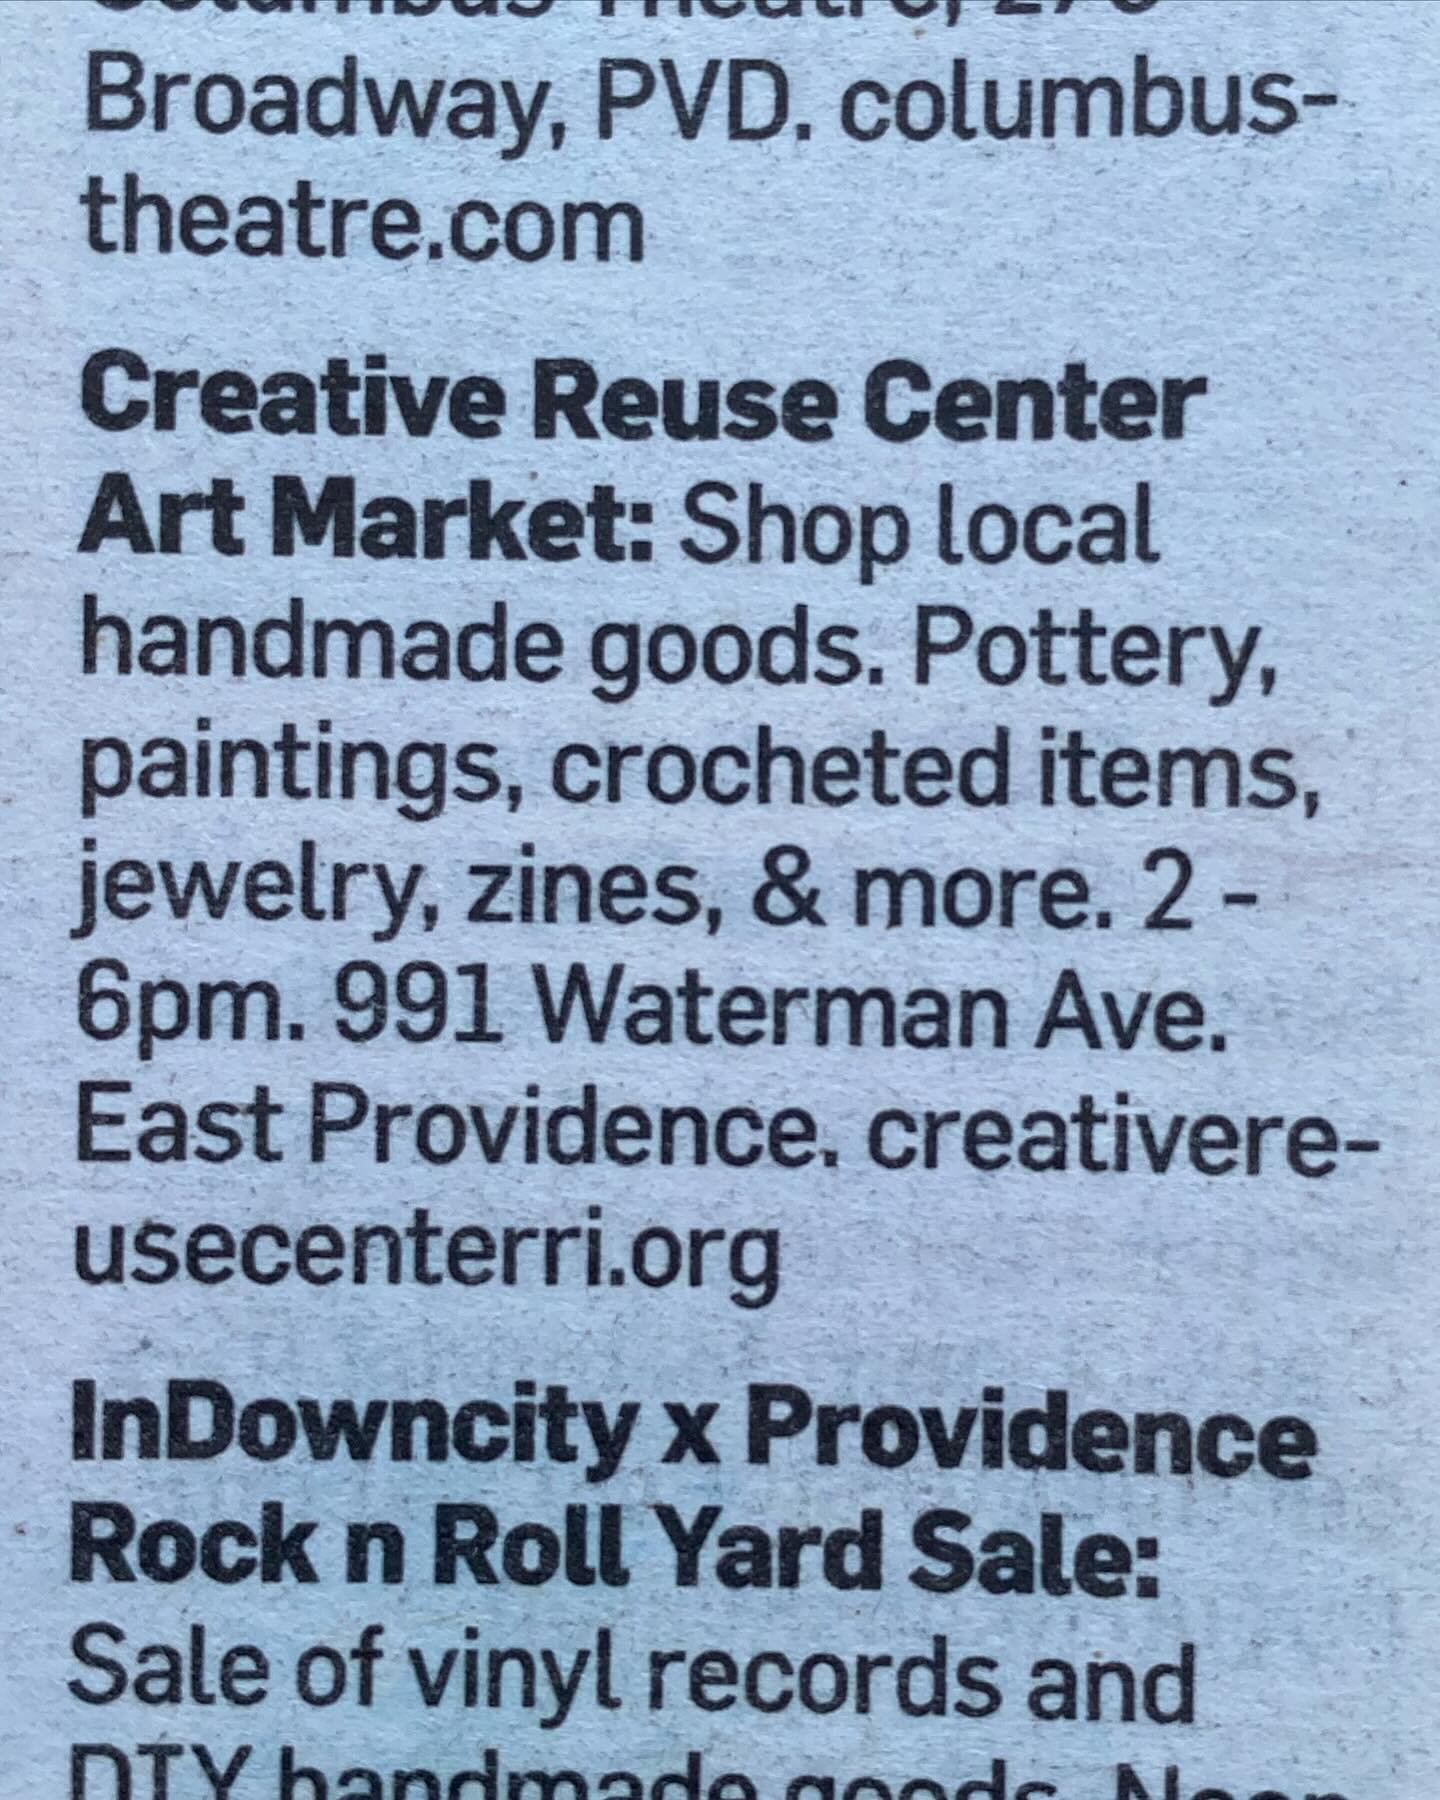 Thanks for including us in your calendar @motifmag ❤️🥳❤️

See you Saturday from 2-6pm for our Art Market!